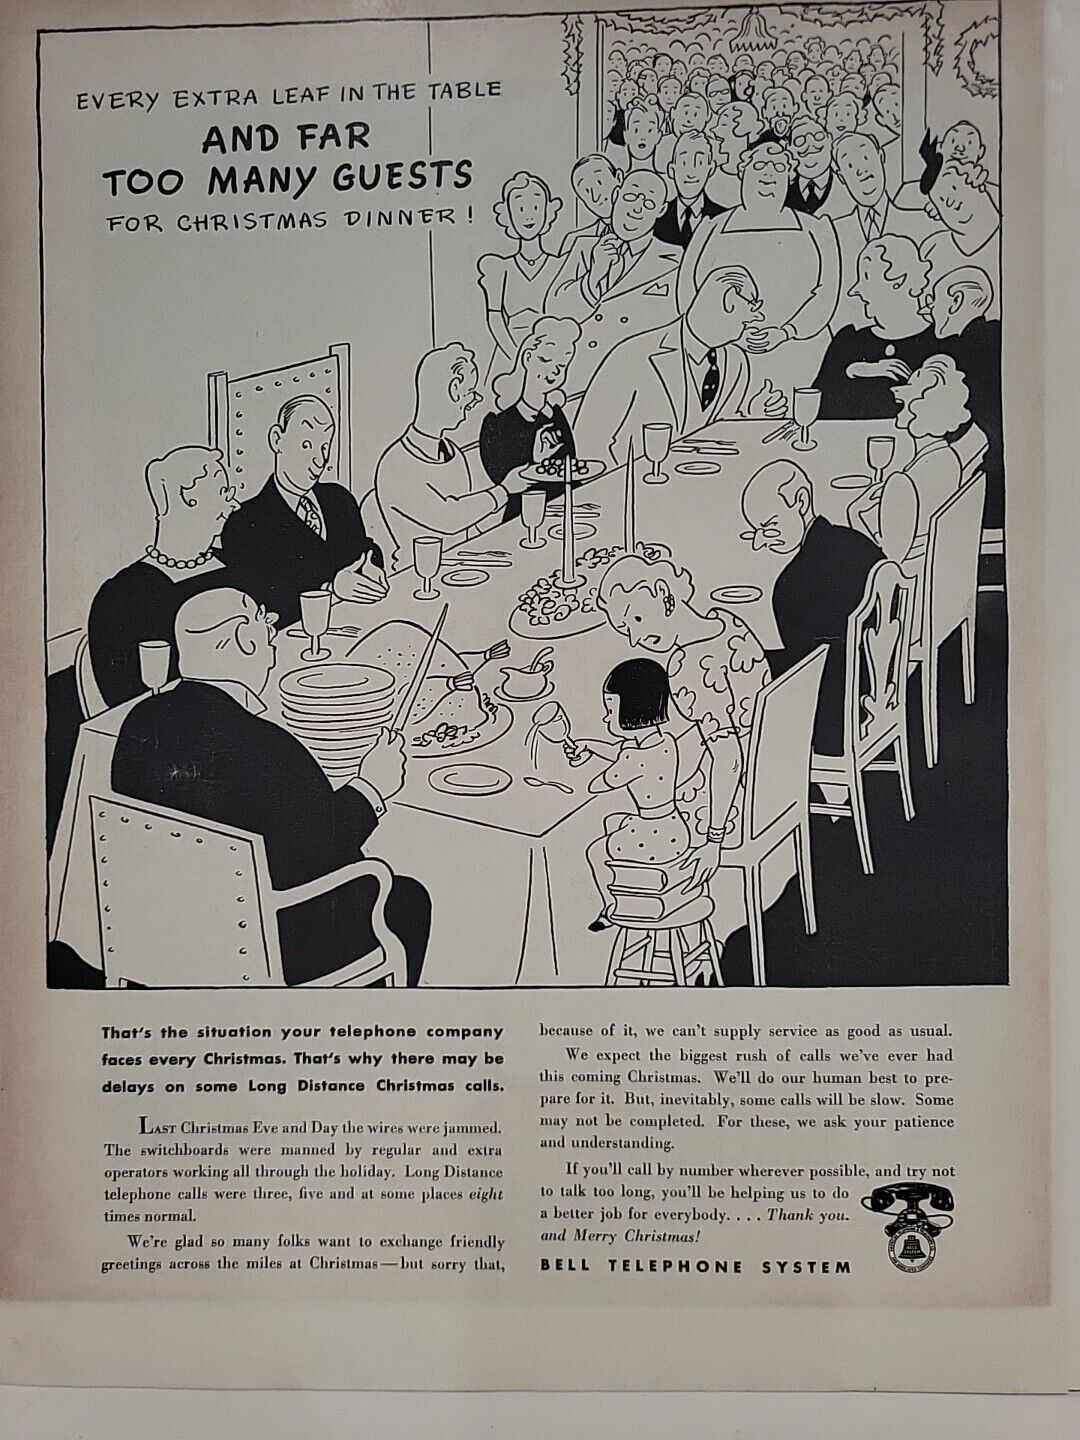 1942 Bell Telephone System Fortune WW2 Print Ad Q1 Christmas Dinner Family Crowd